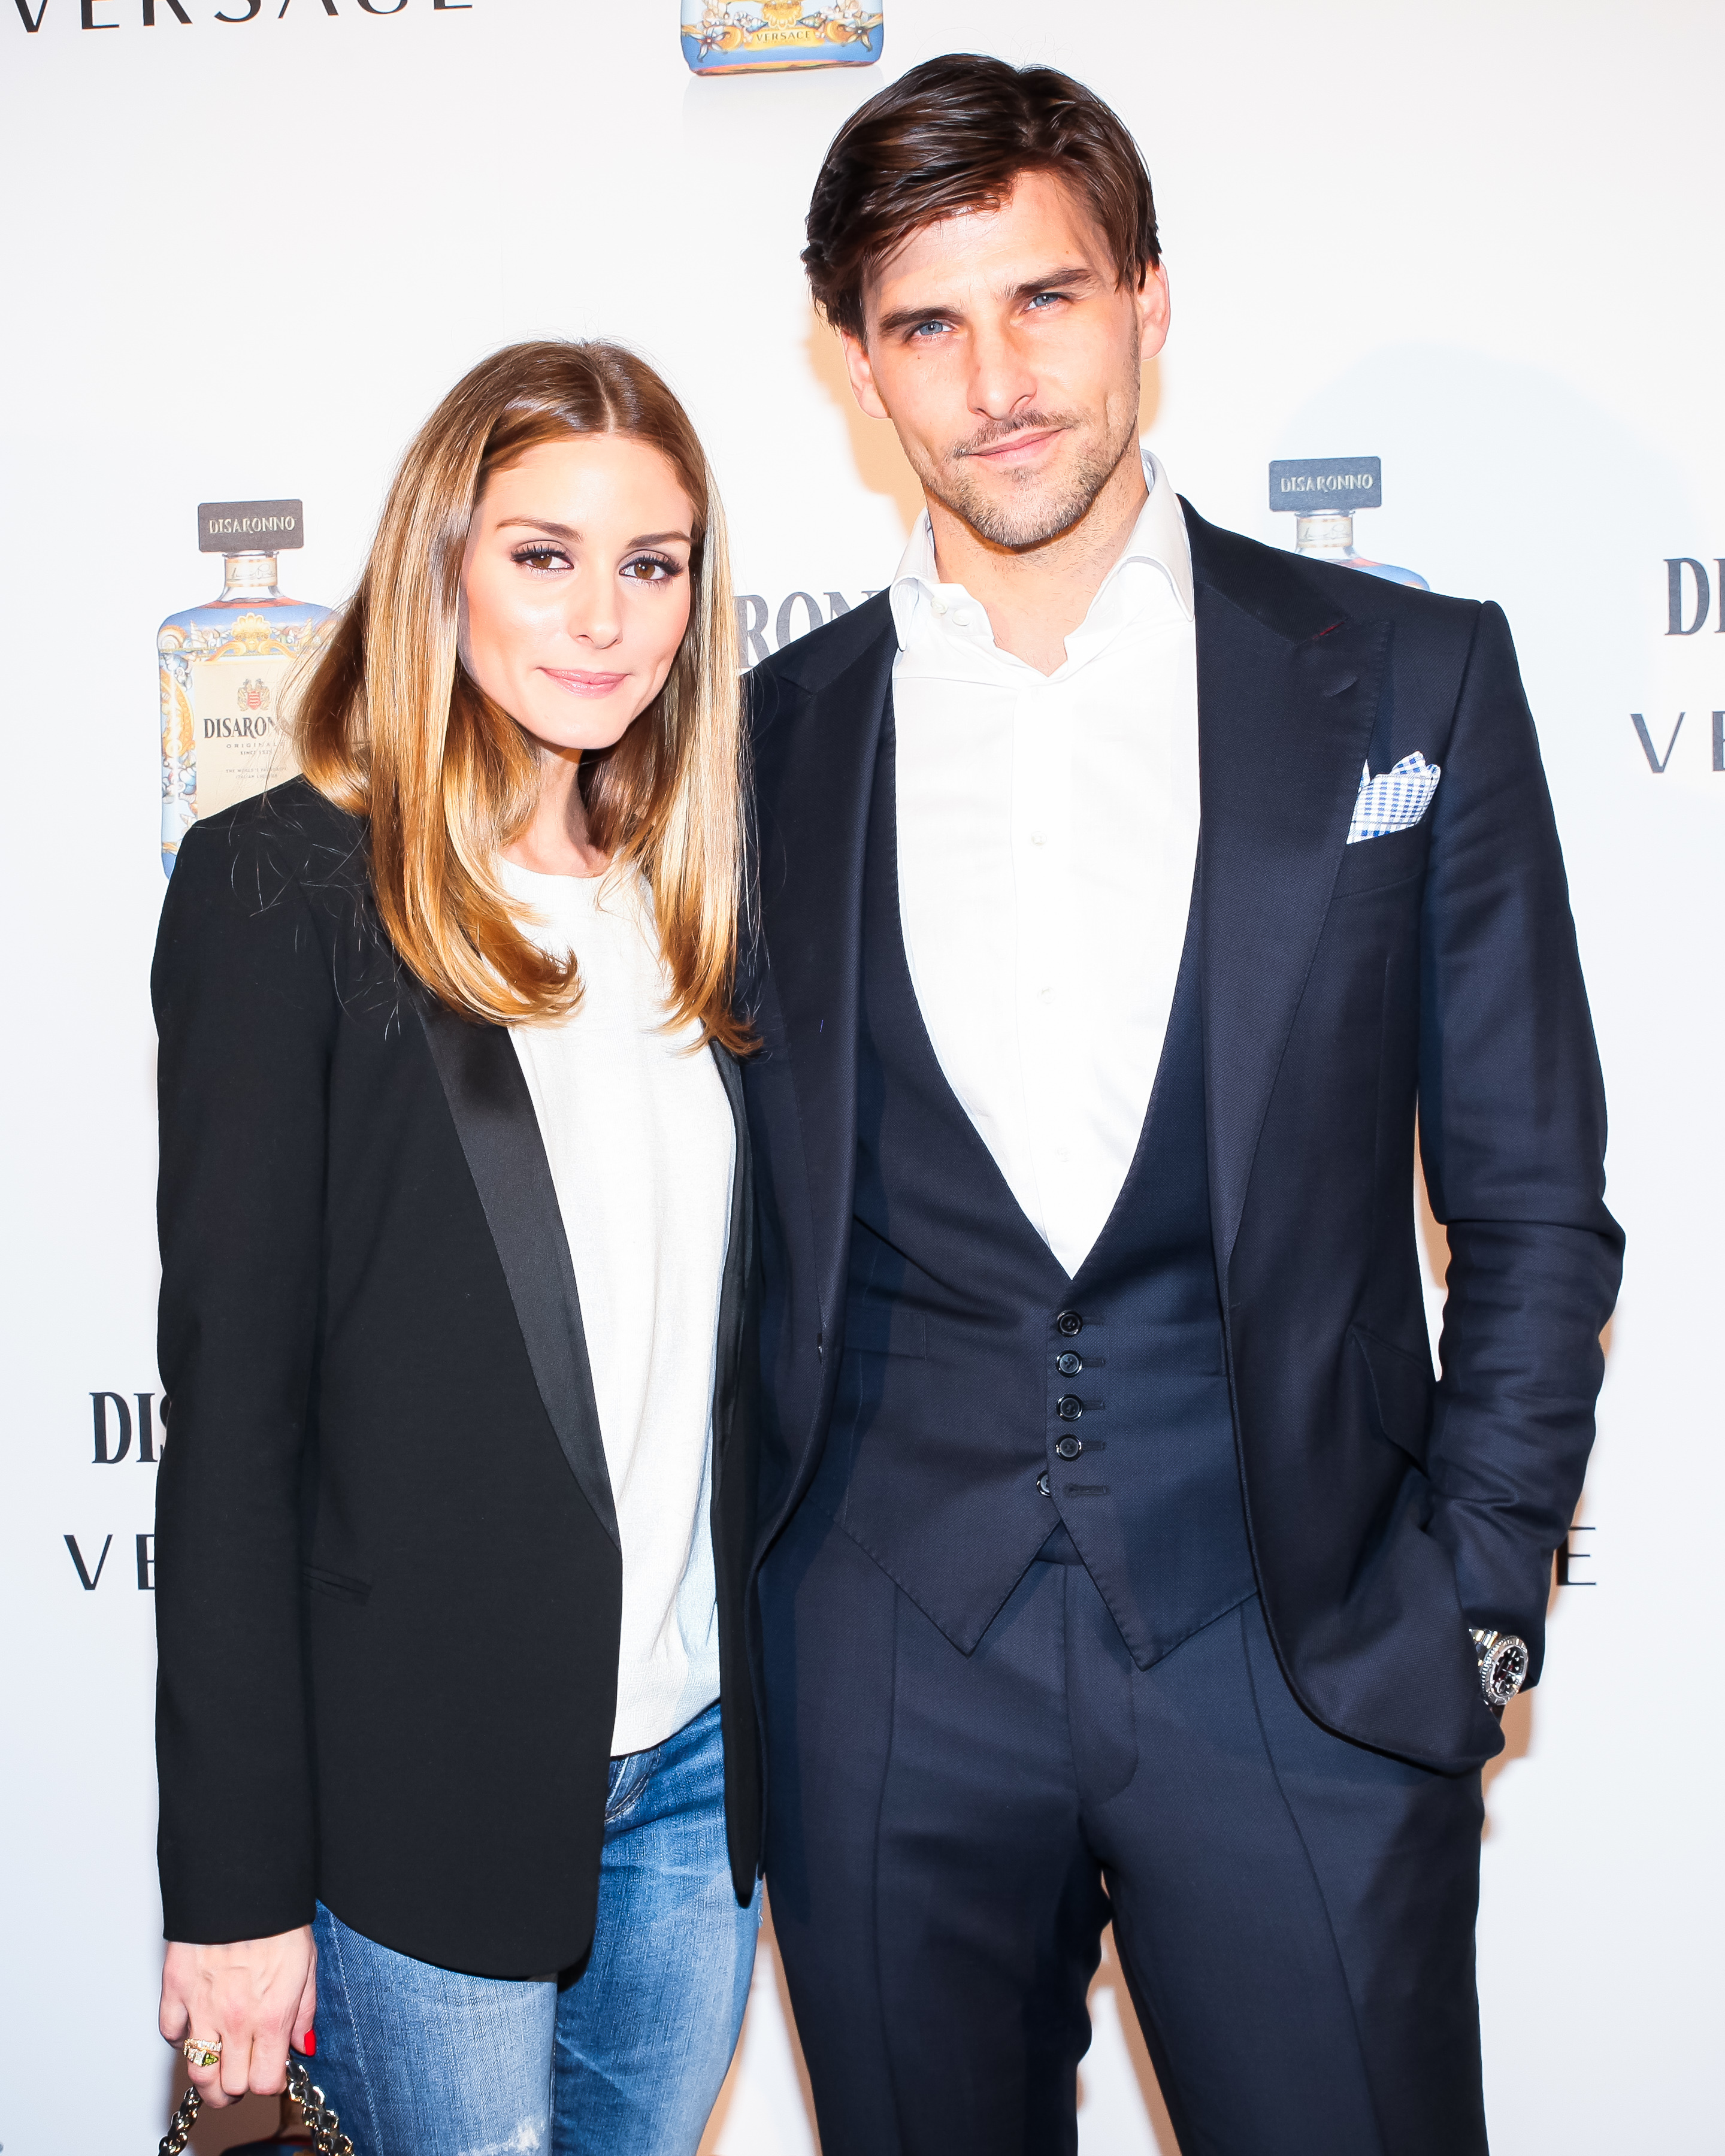 Olivia Palermo & Johannes Huebl - Disaronno Launches the Disaronno Wears Versace Bottle in New York City